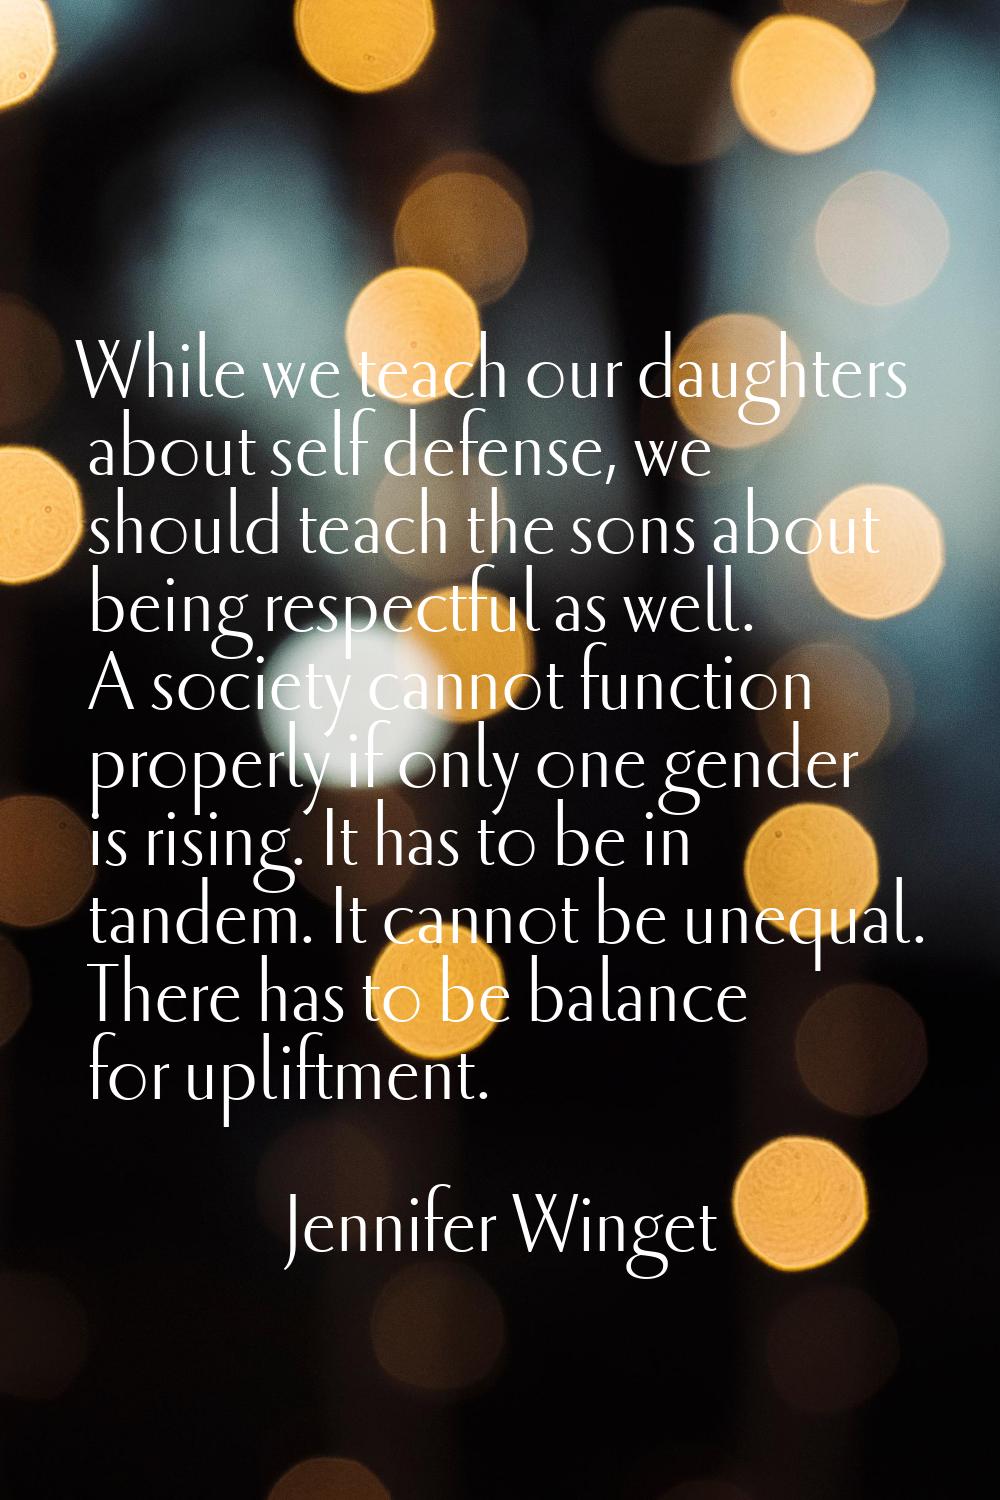 While we teach our daughters about self defense, we should teach the sons about being respectful as